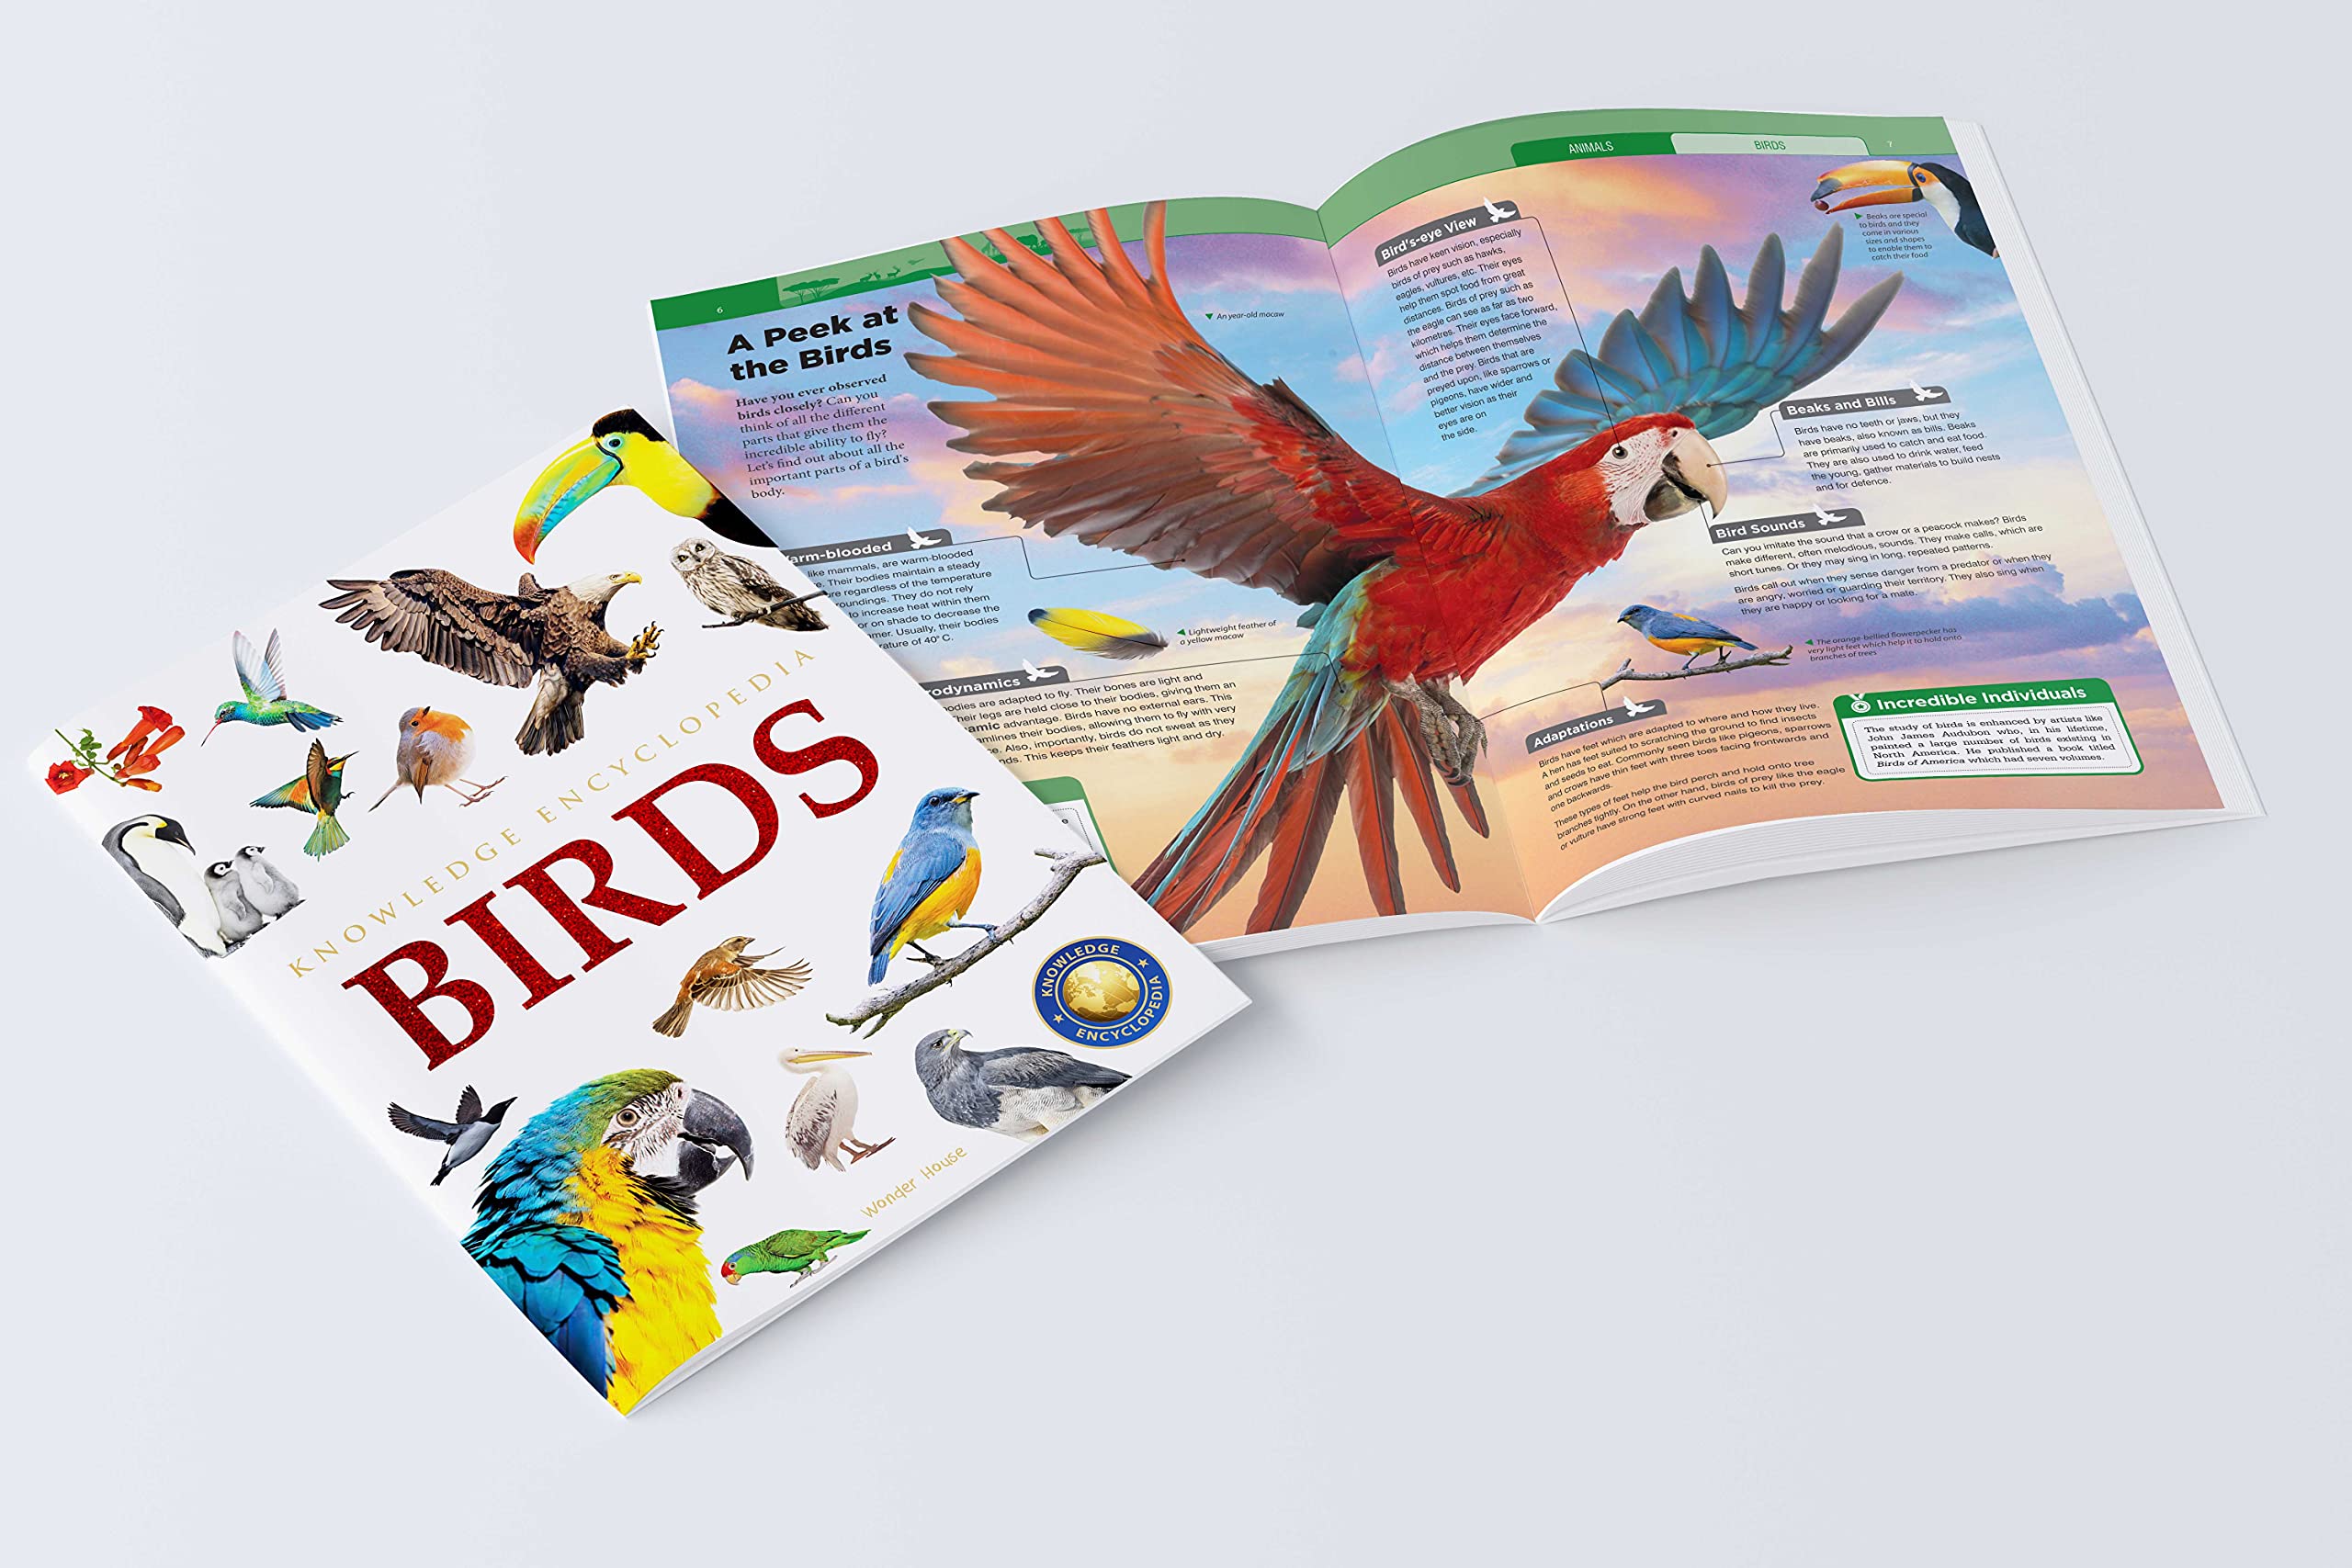 Animals - Collection of 6 Books: Knowledge Encyclopedia For Children (Box Set) - The English Bookshop Kuwait